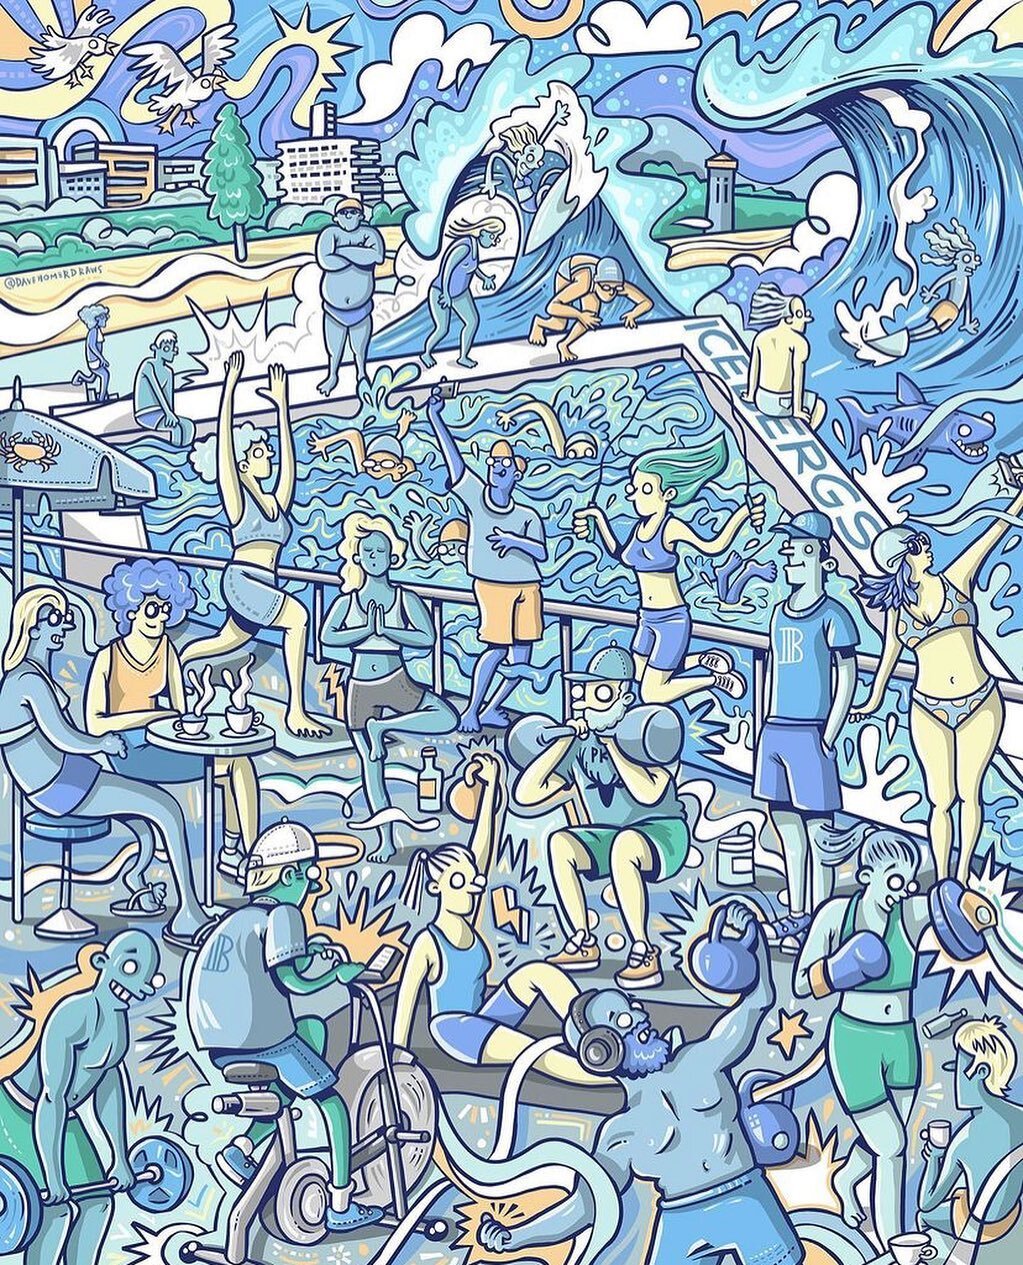 Our talented member @davehomerdraws has captured the Icebergs Gym here perfectly! We can see a lot of our members in this pic! Who can you spot? Thank you Dave! We are missing our gym family greatly and are looking forward to seeing you all again soo